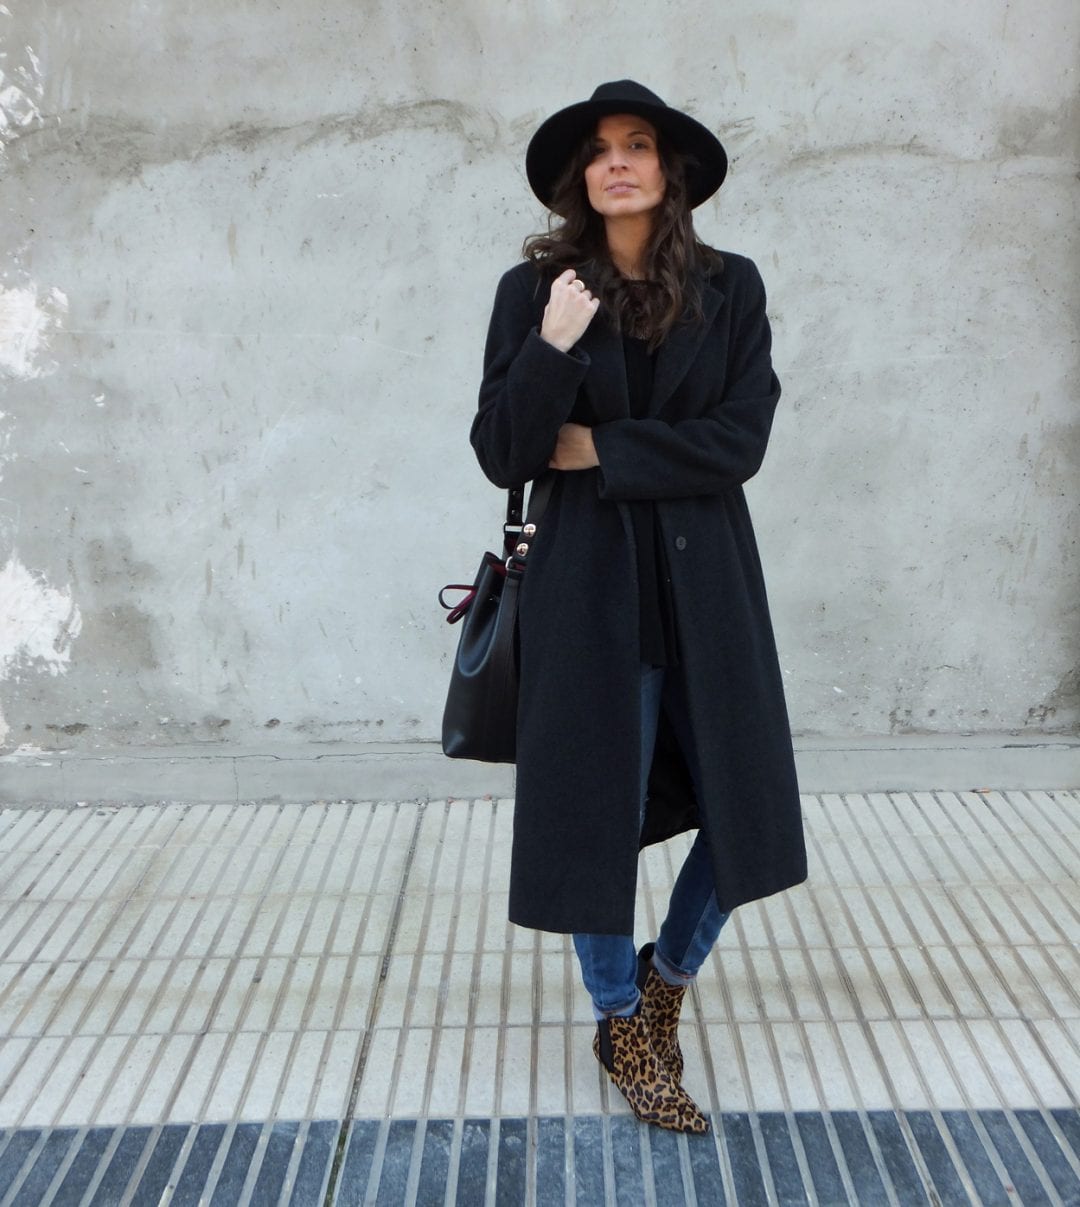 long grey coat - leopard booties - fedora hat - fashion blogger outfit 